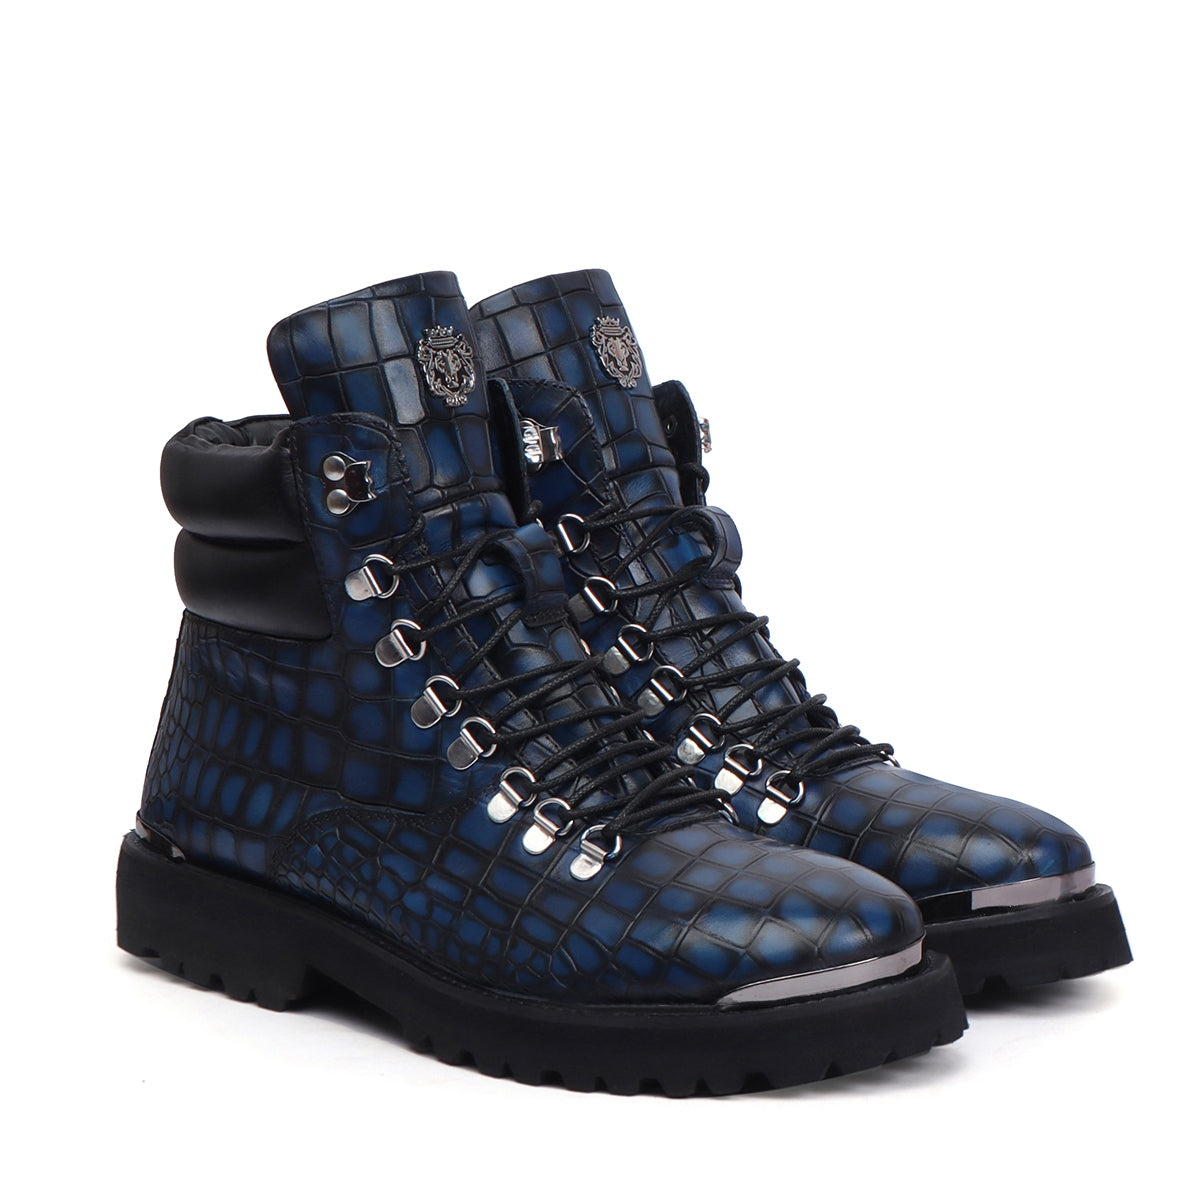 Smokey Blue Chunky Boots With Croco Textured Leather